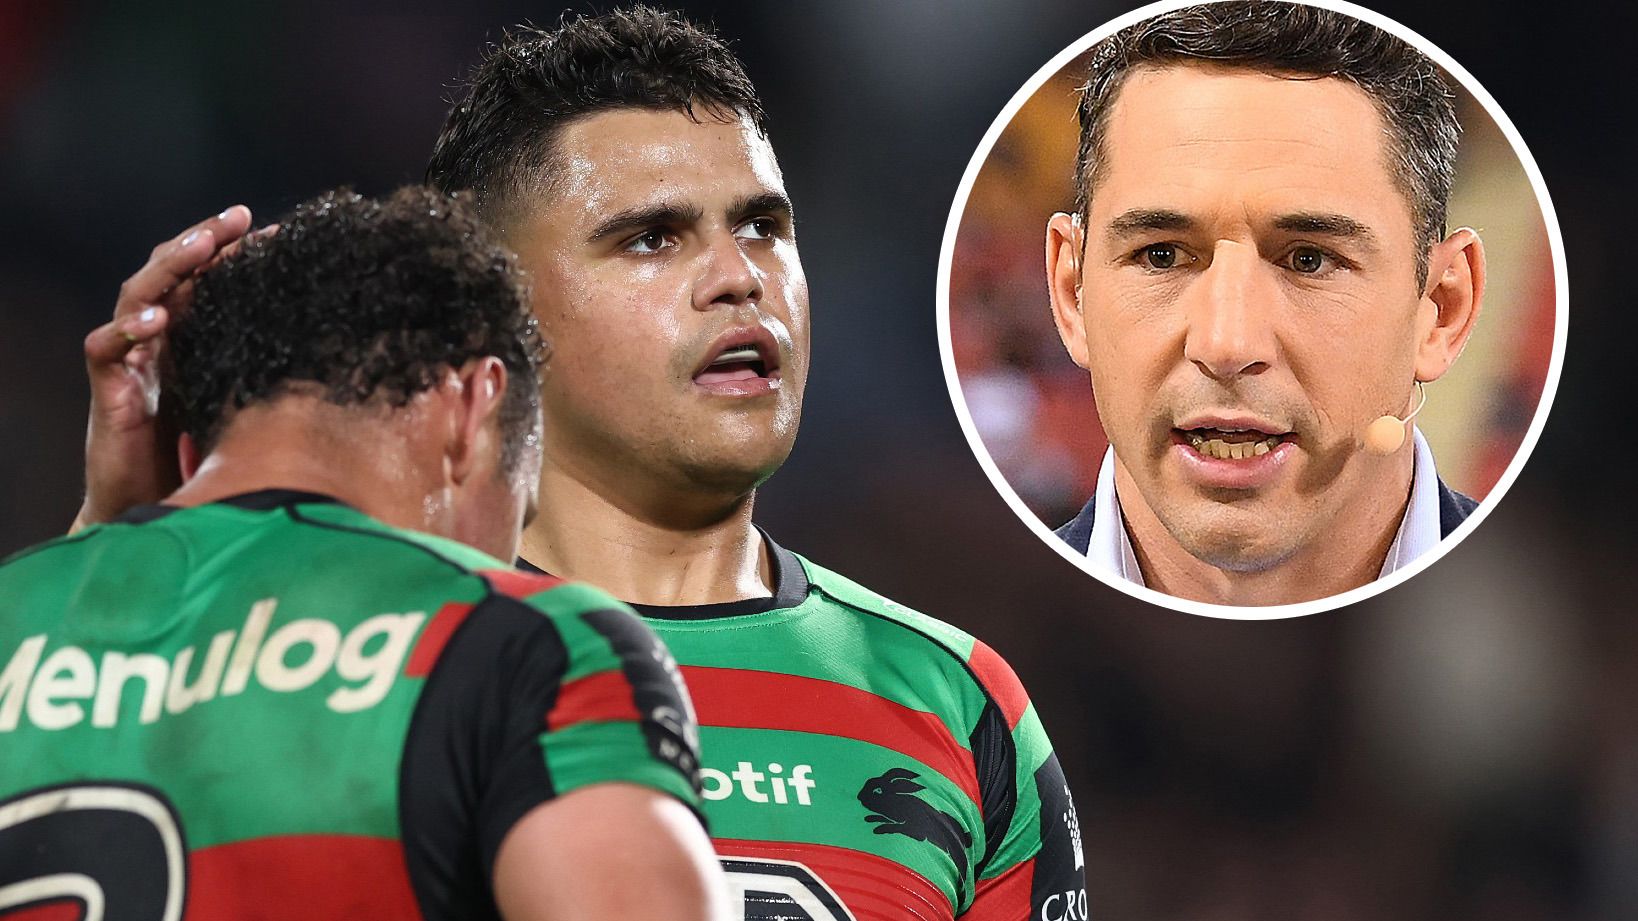 Billy Slater has weighed in on the racial abuse aimed at Latrell Mitchell.